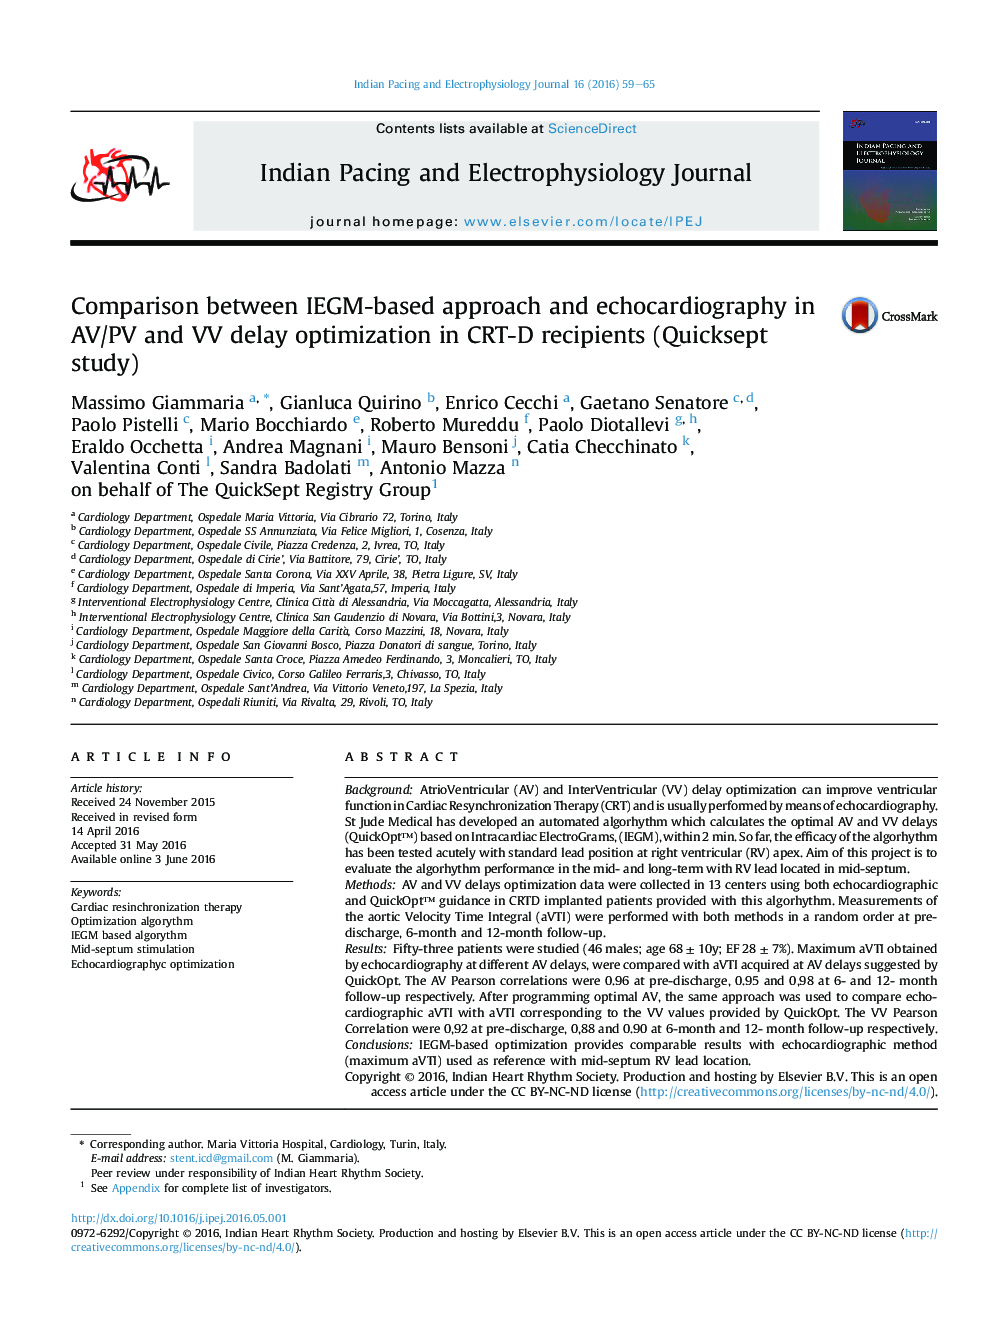 Comparison between IEGM-based approach and echocardiography in AV/PV and VV delay optimization in CRT-D recipients (Quicksept study)